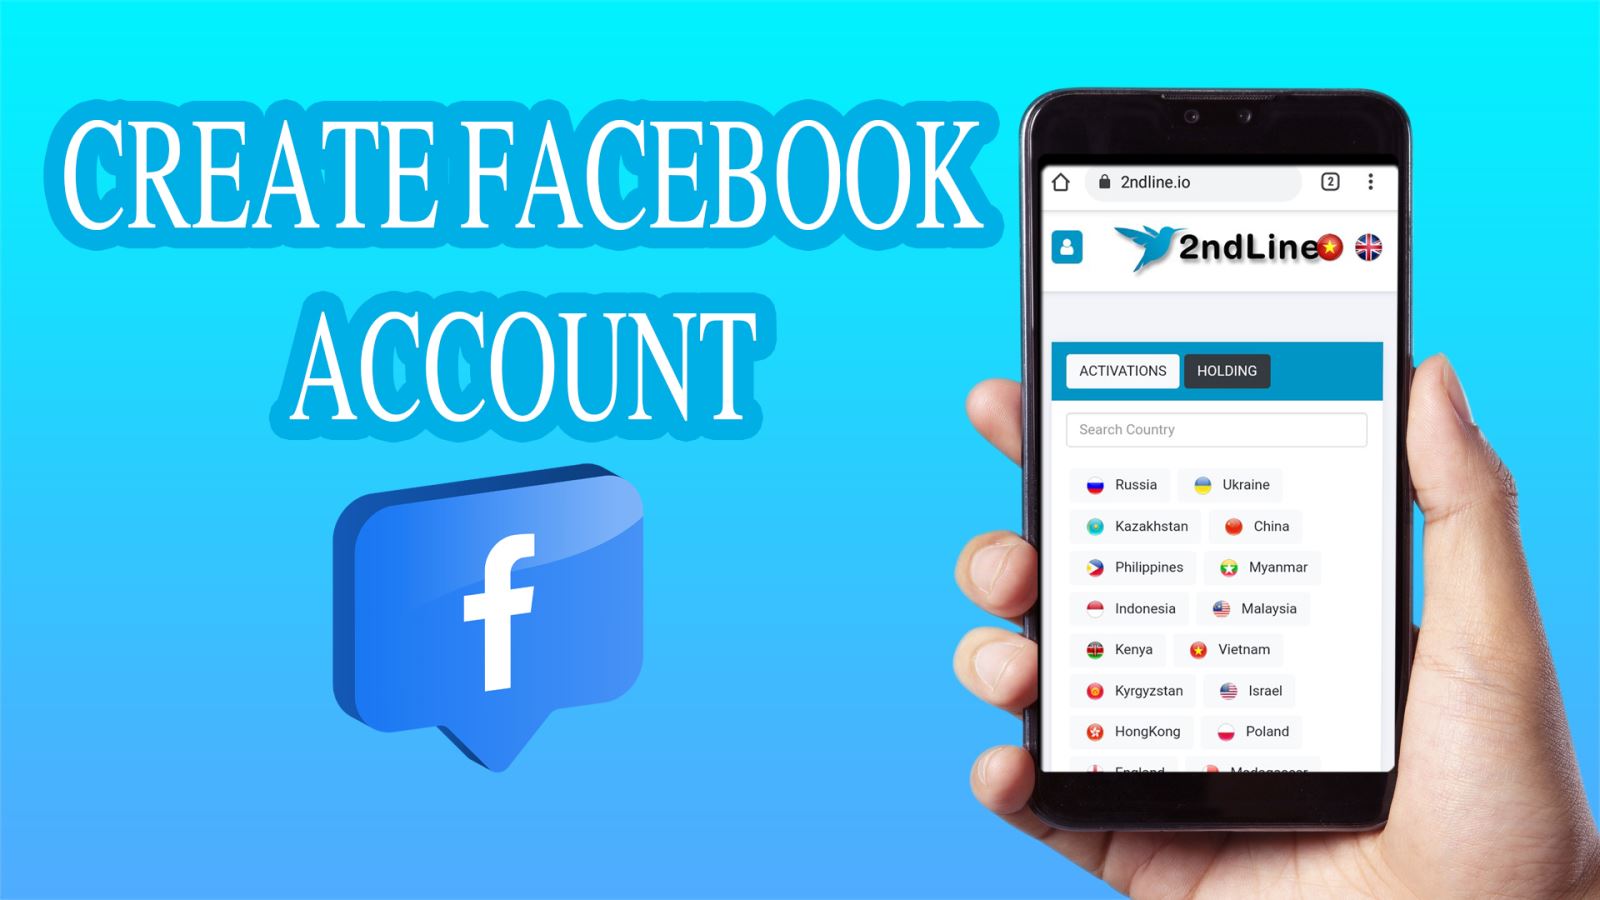 Create steps account to fb Top 10